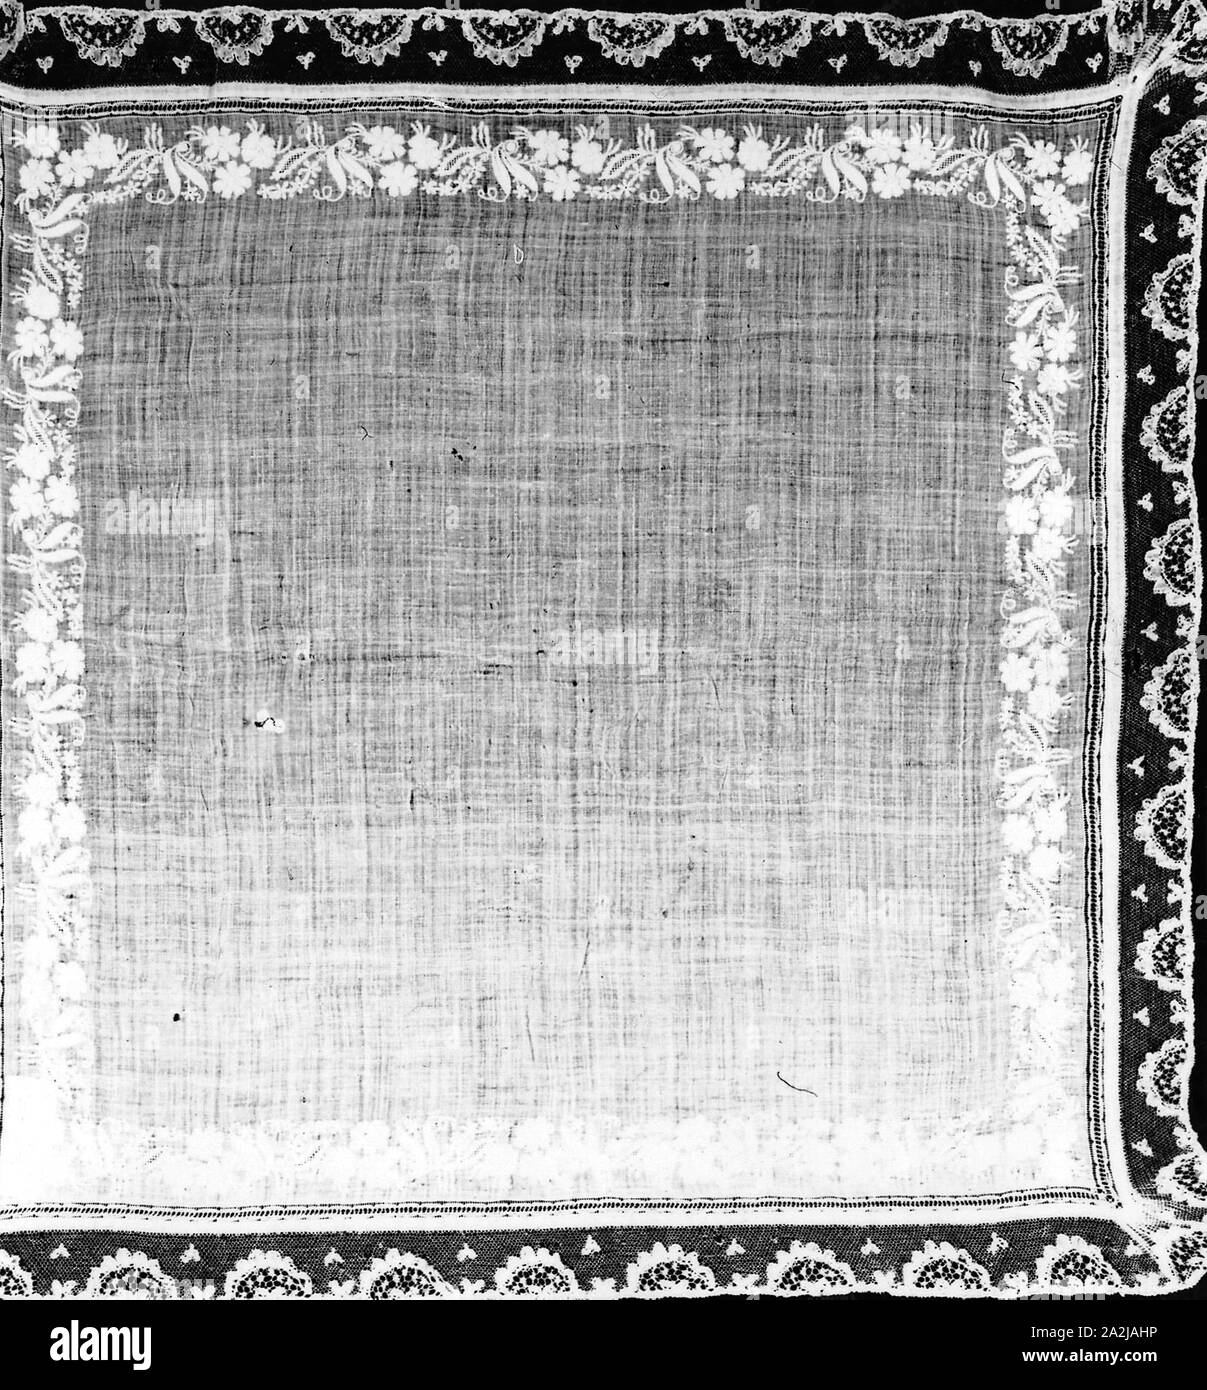 Border, Medium: linen Technique: needle lace, Small-scale design of short  curving branches with flowers and sprigs. Pattern has varying degrees of  raised work with some areas showing graduated padding covered with  buttonhole